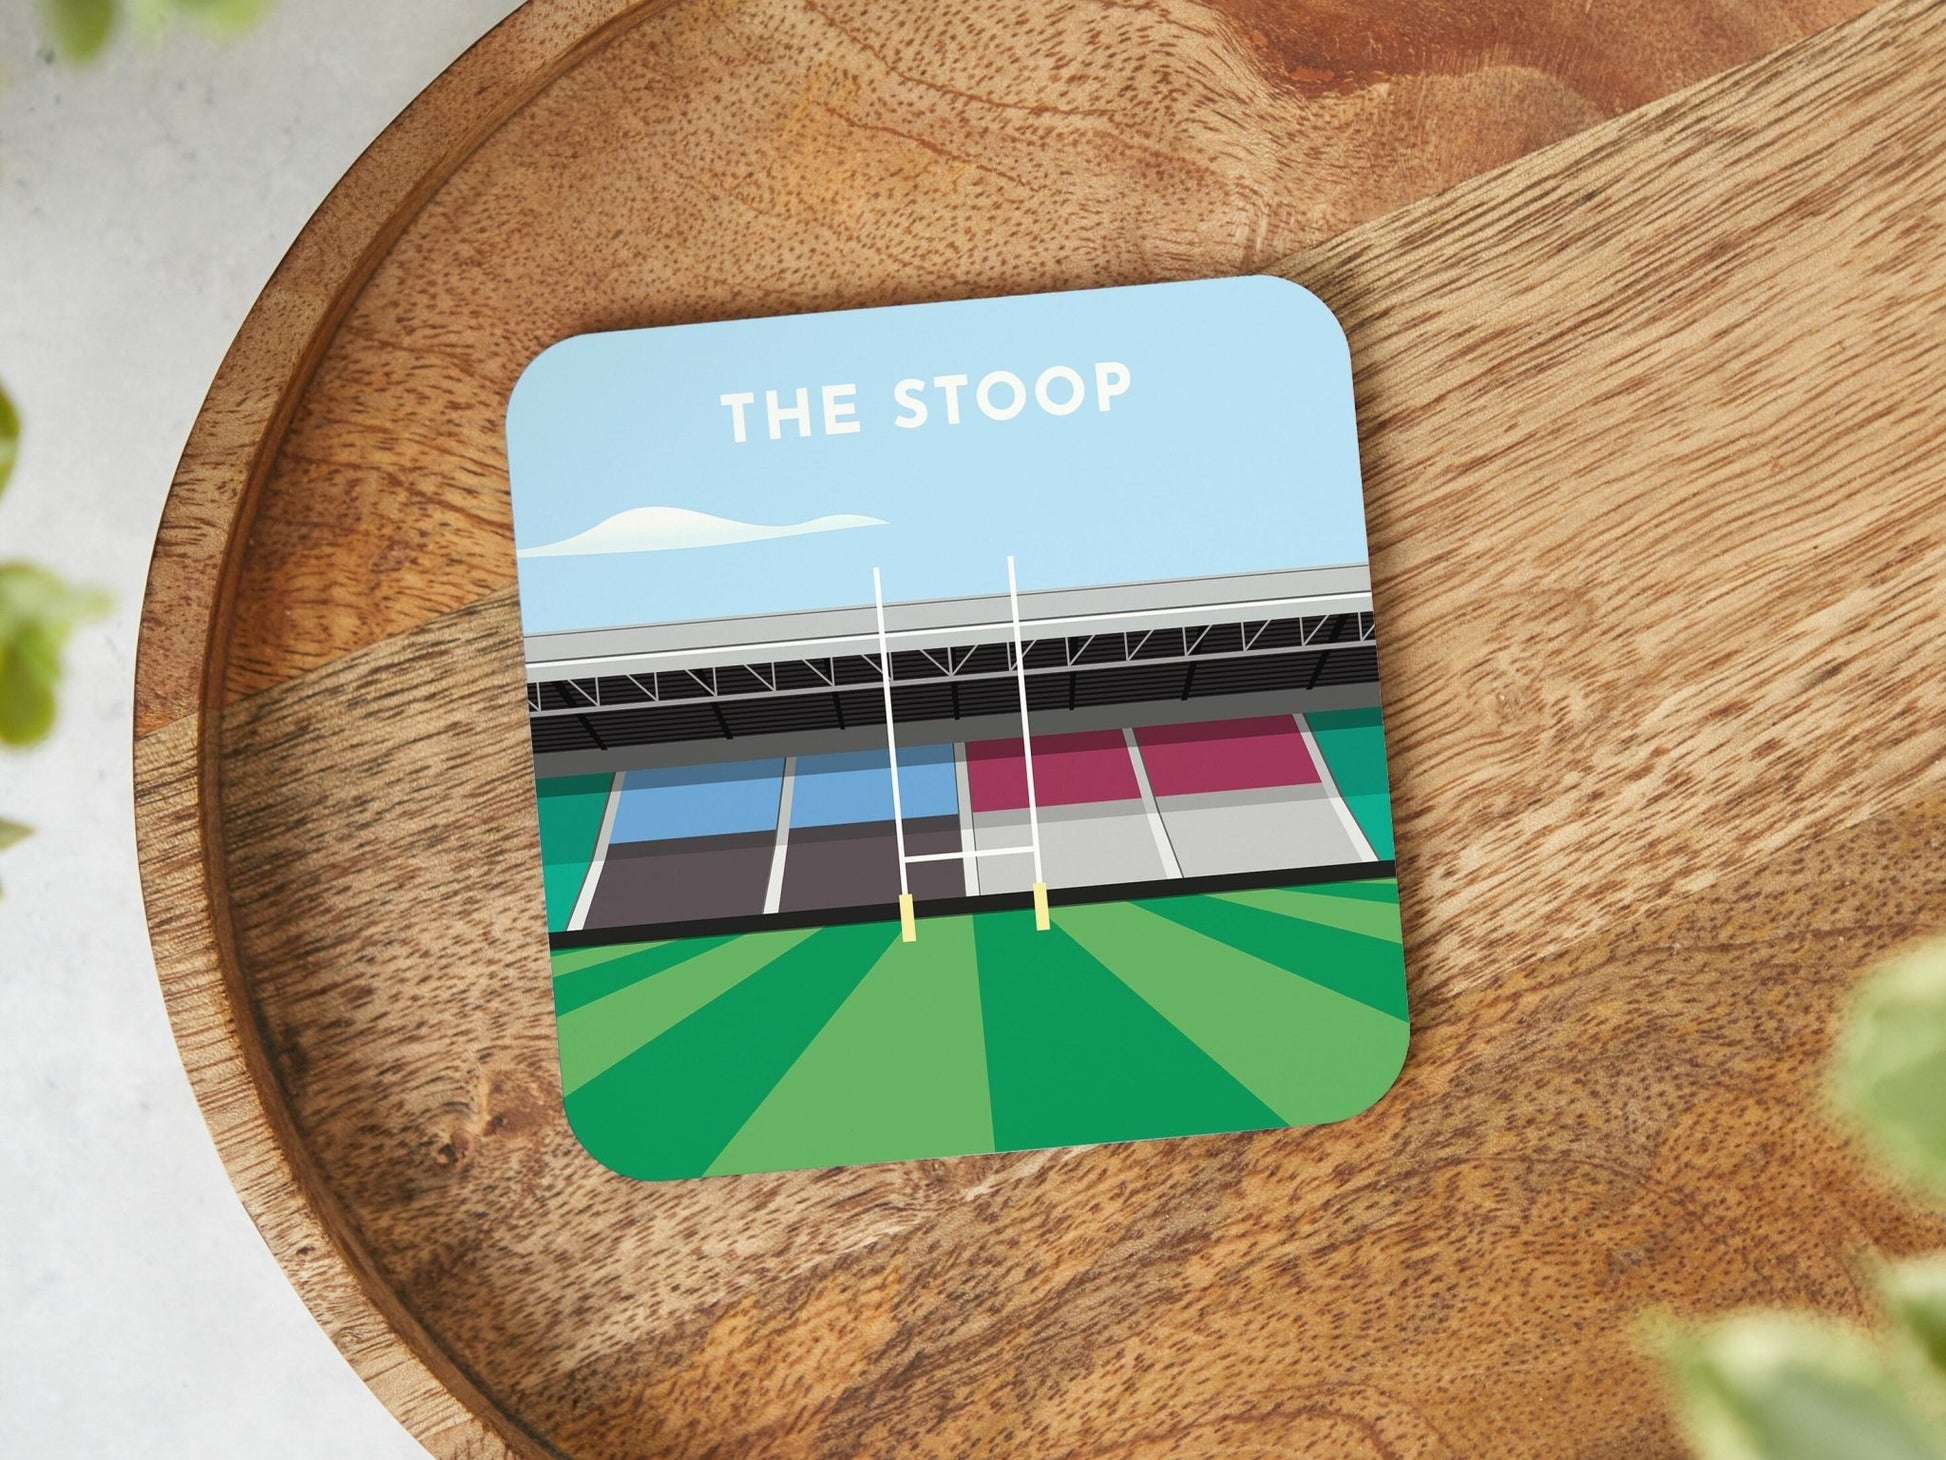 Harlequin Rugby Coaster Gift - The Stoop Illustrated Drinks Mat - Rugby Gifts for Him Her - Office Gifts - Turf Football Art